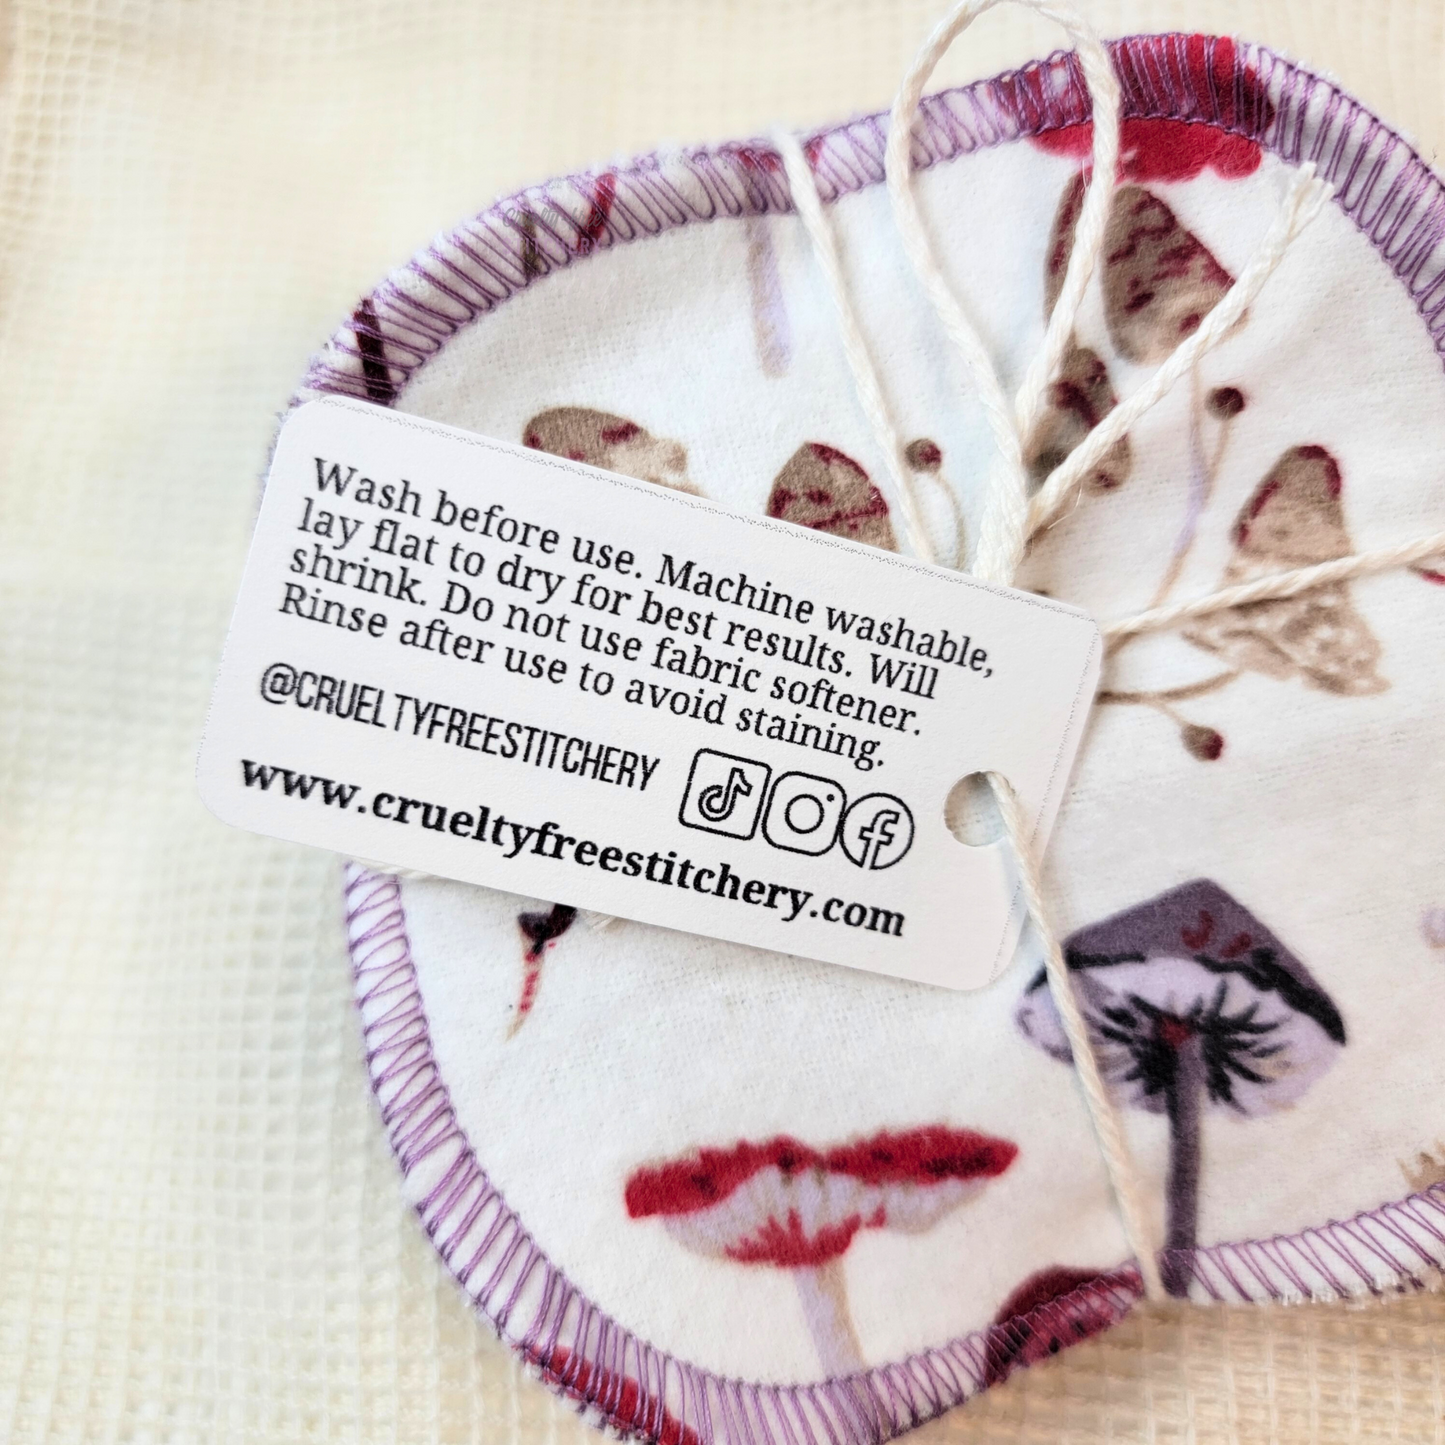 The back of the small tag on the reusable cotton rounds with care instructions and our contact info. This can be found in the item description.